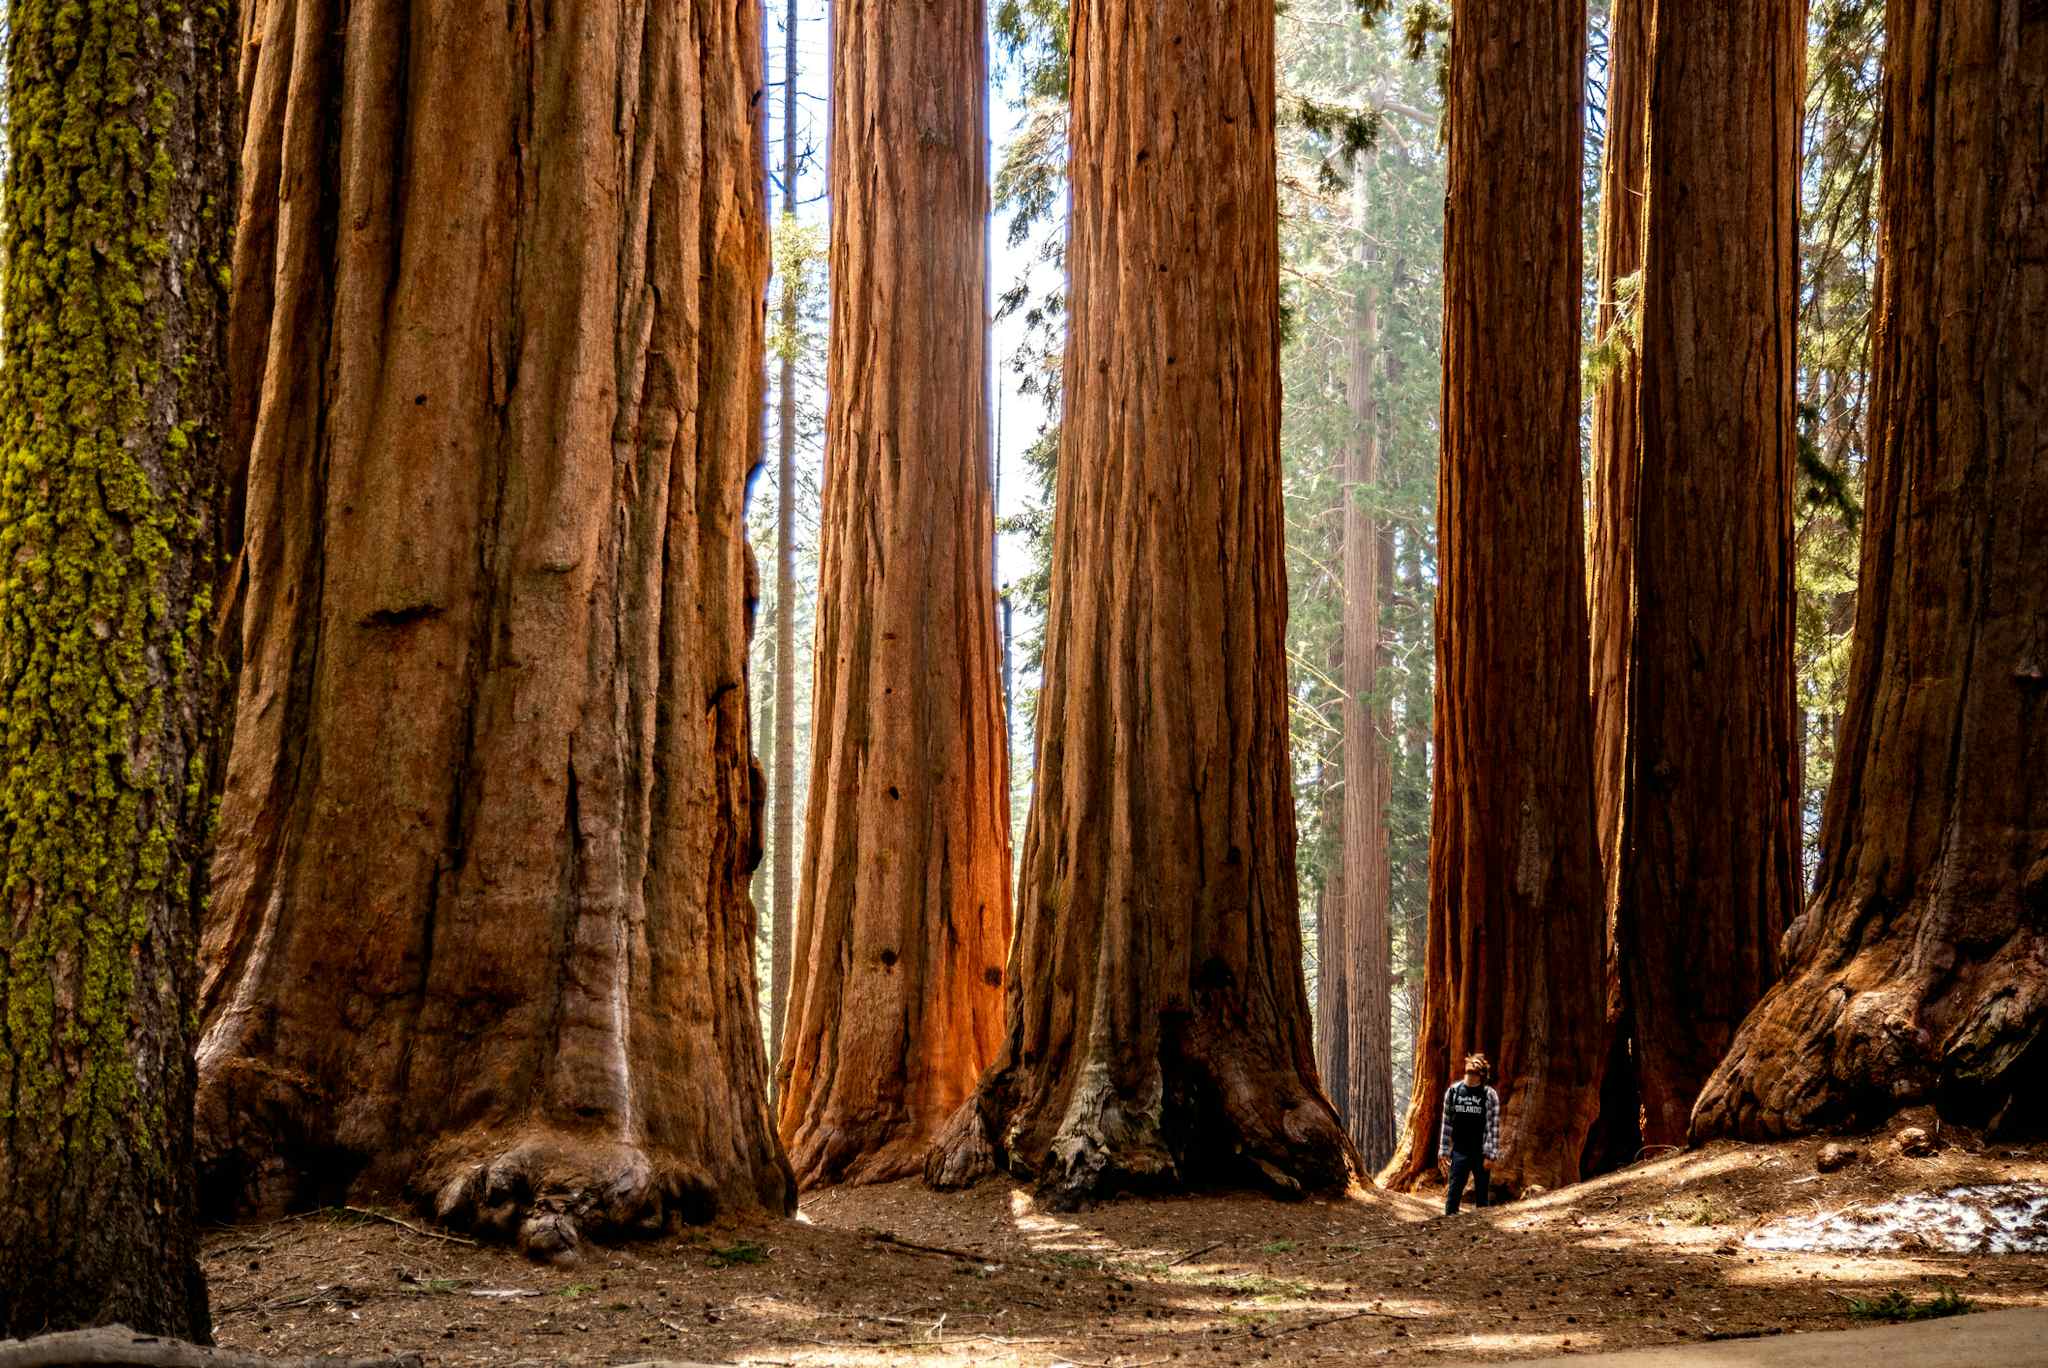 Standing in a grove of Sequoias in Sequoia National Park
Getty: 1452911237